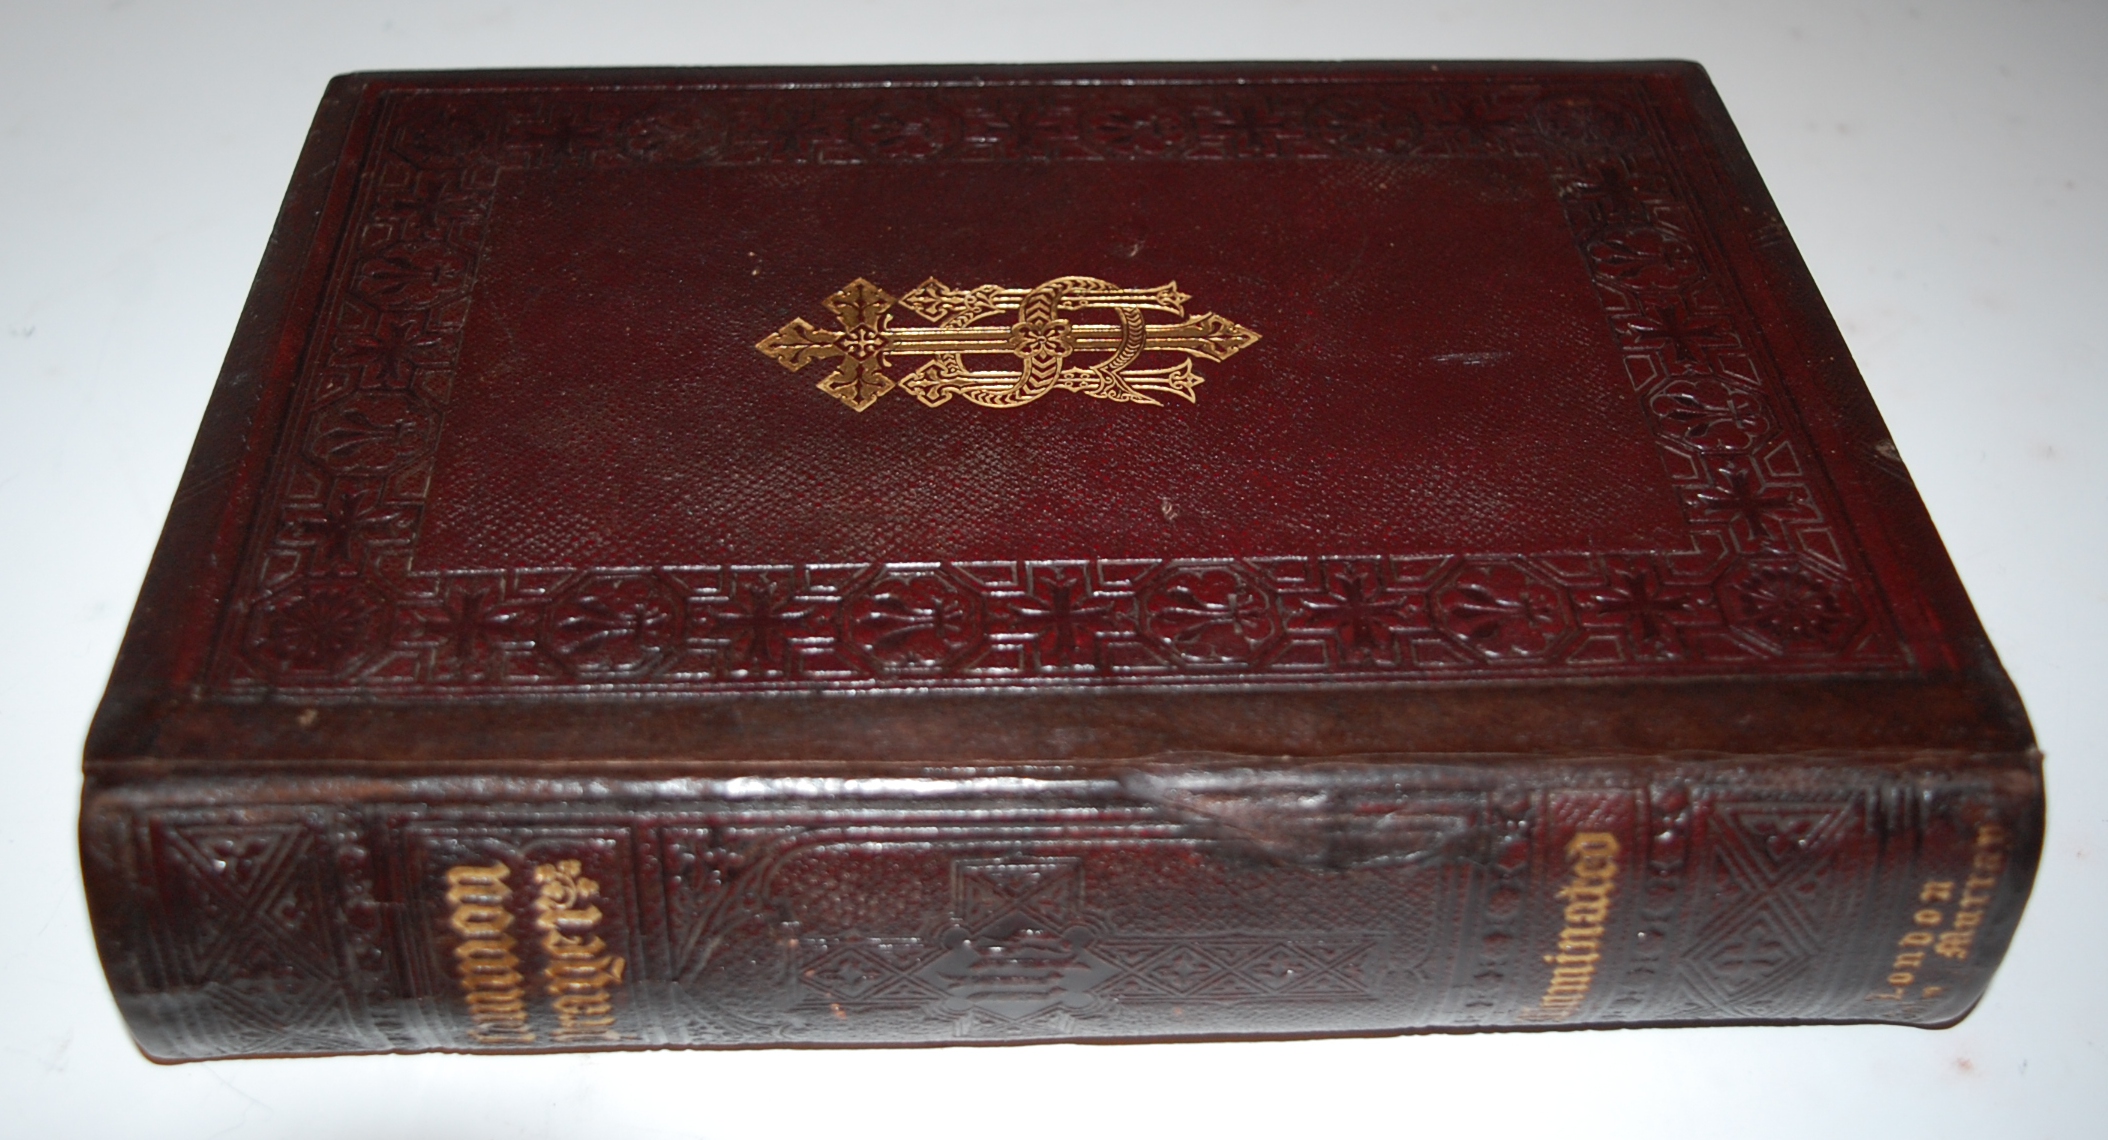 Book of Common Prayer, London, John Murray 1845, large 8vo, full embossed decorative leather, - Image 2 of 6